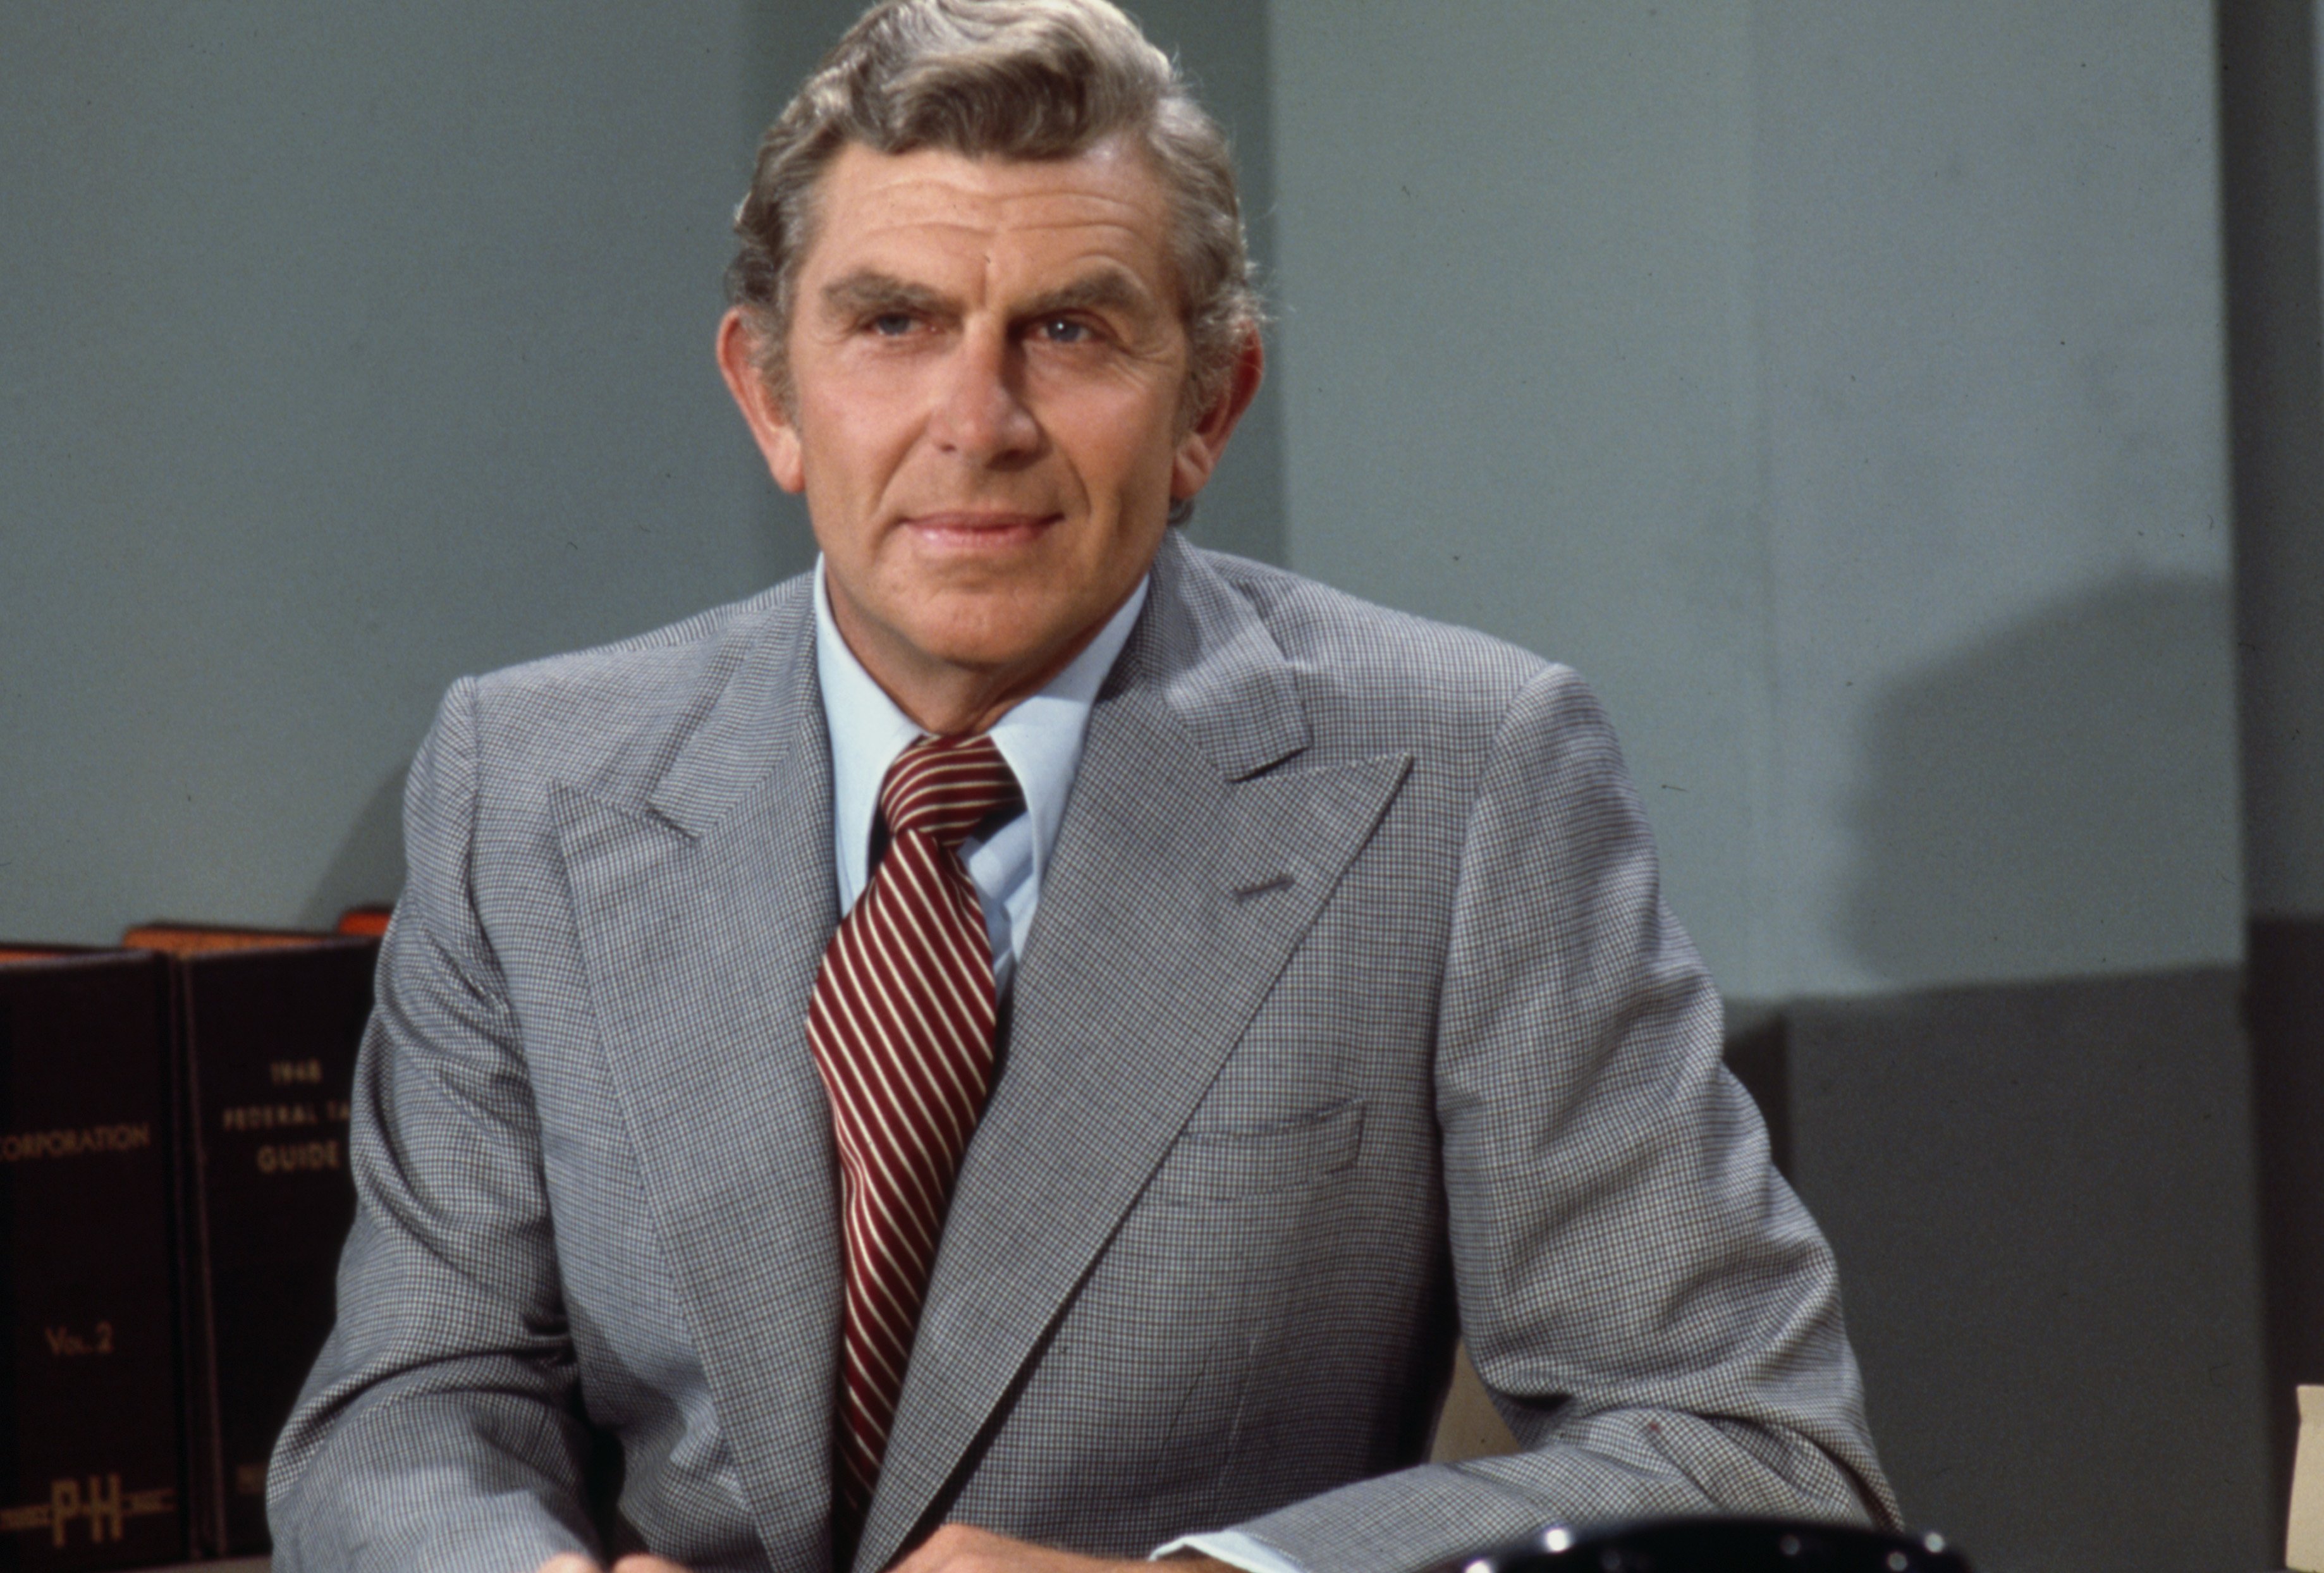 Portrait of Andy Griffith in a gray suit and yellow tie in 1976